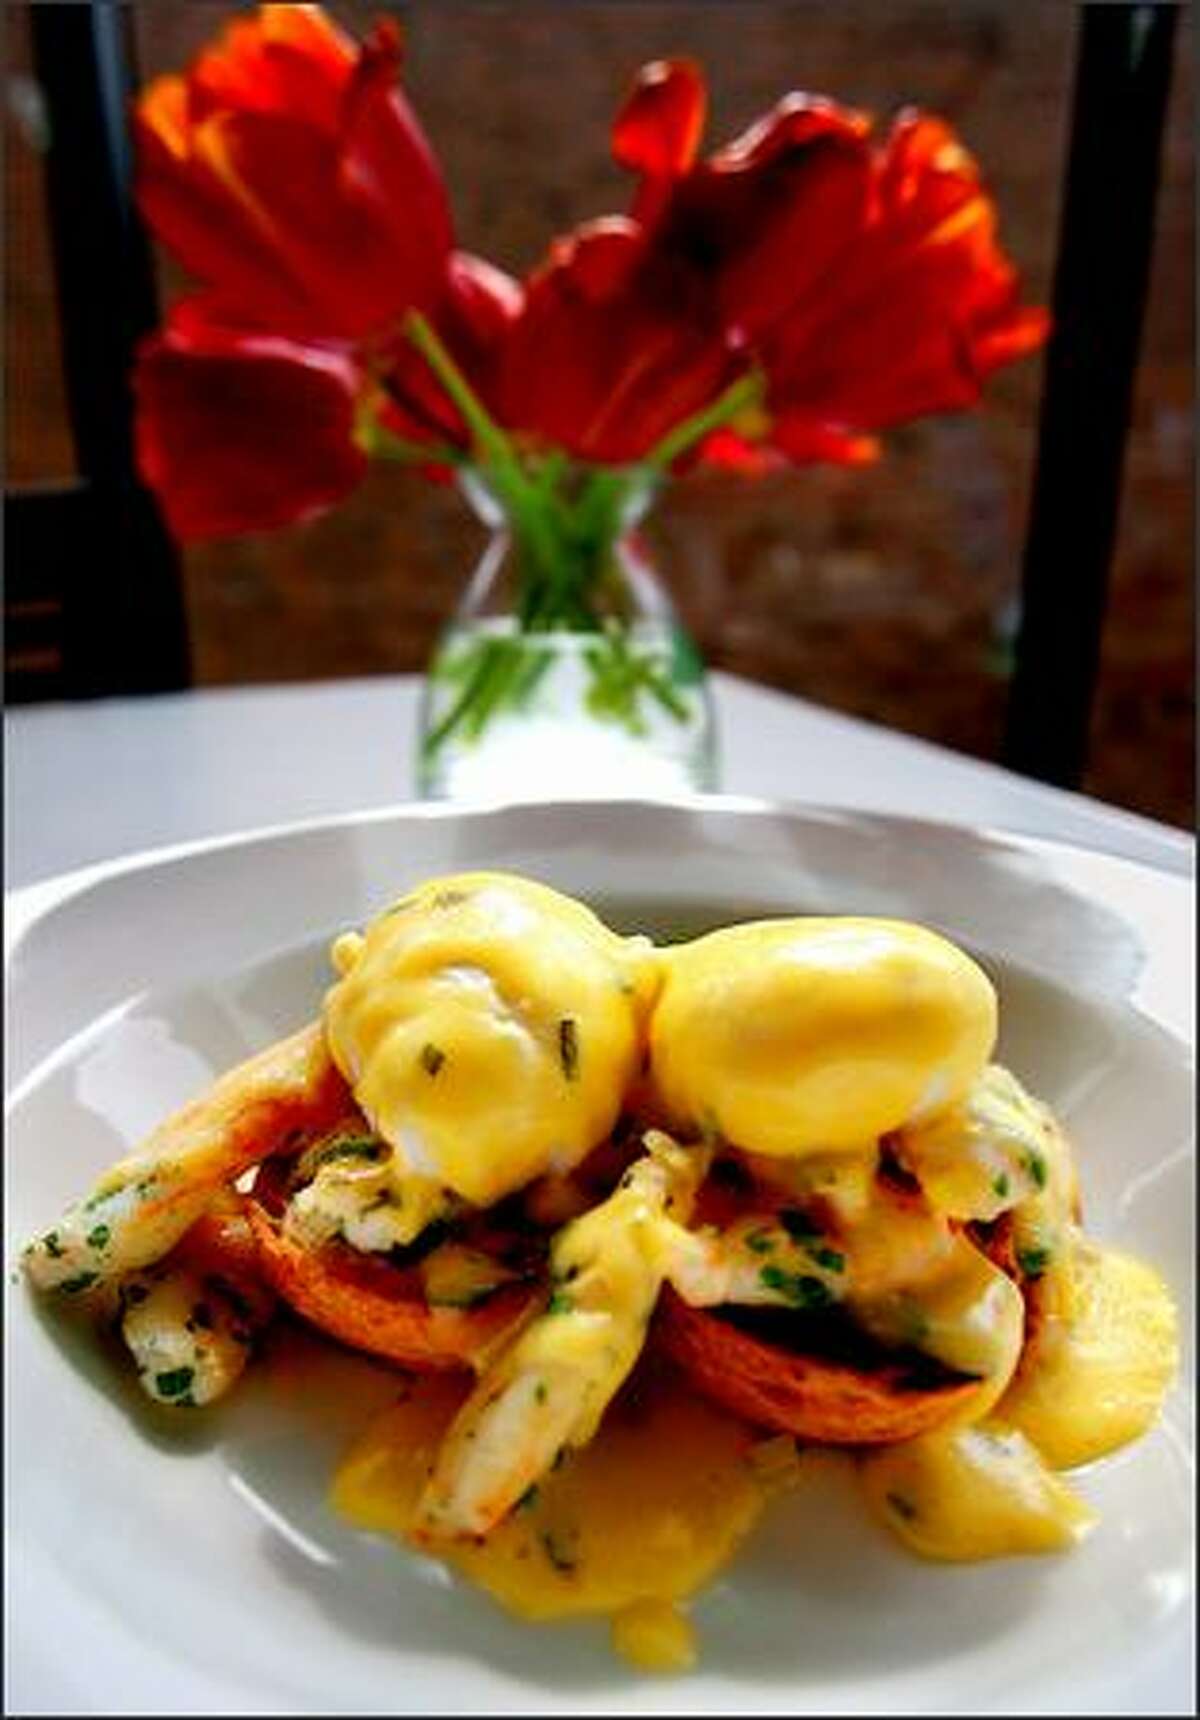 Squimbled Eggs, or Steelhead Diner-style eggs Benedict: poached eggs, crab, herbed toast and hollandaise sauce.